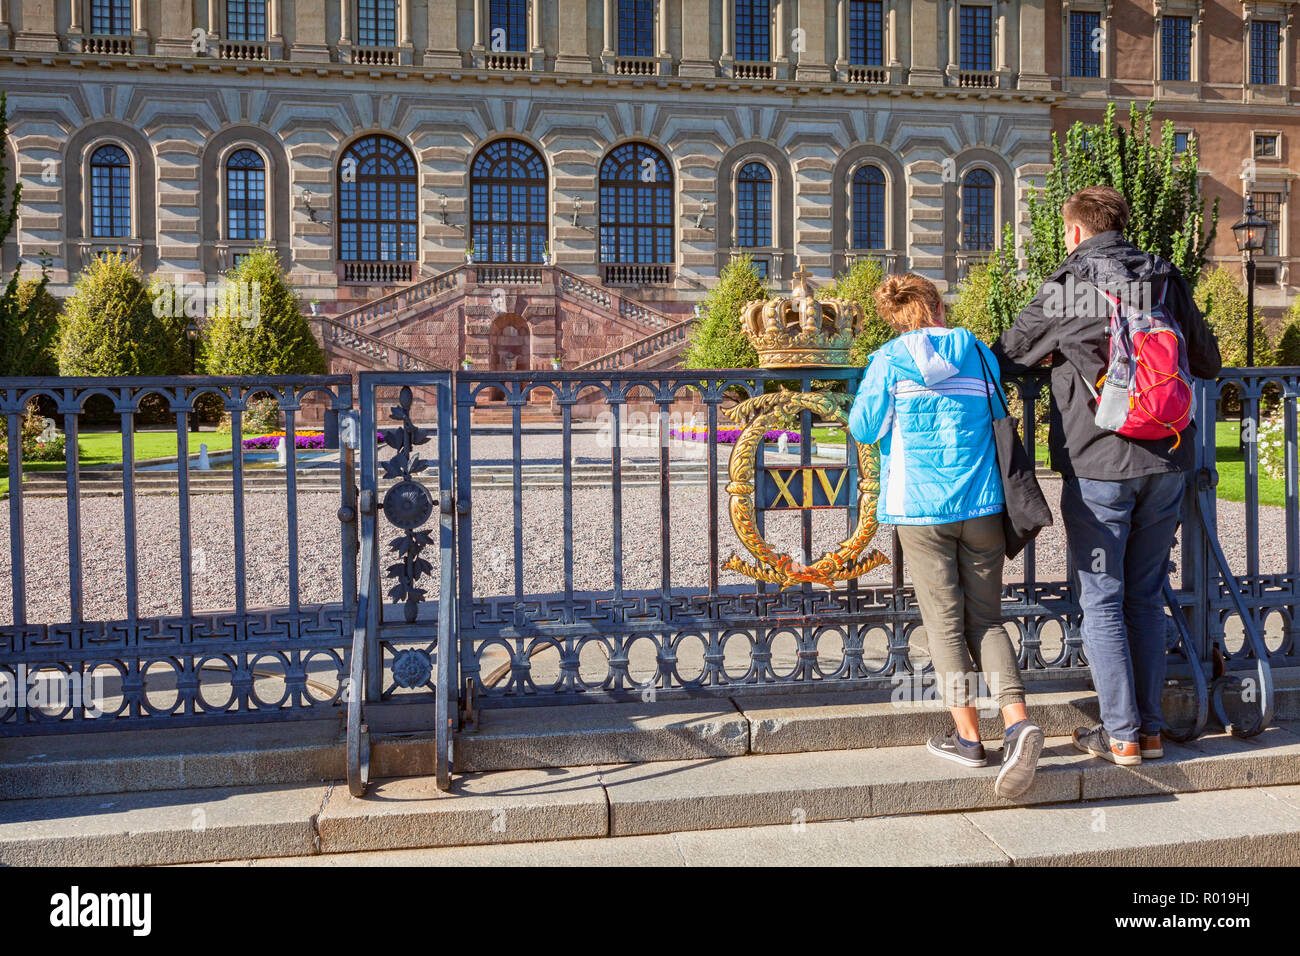 16 September 2018: Stockholm, Sweden - Young couple sightseeing at the gates of the Royal Palace. Stock Photo